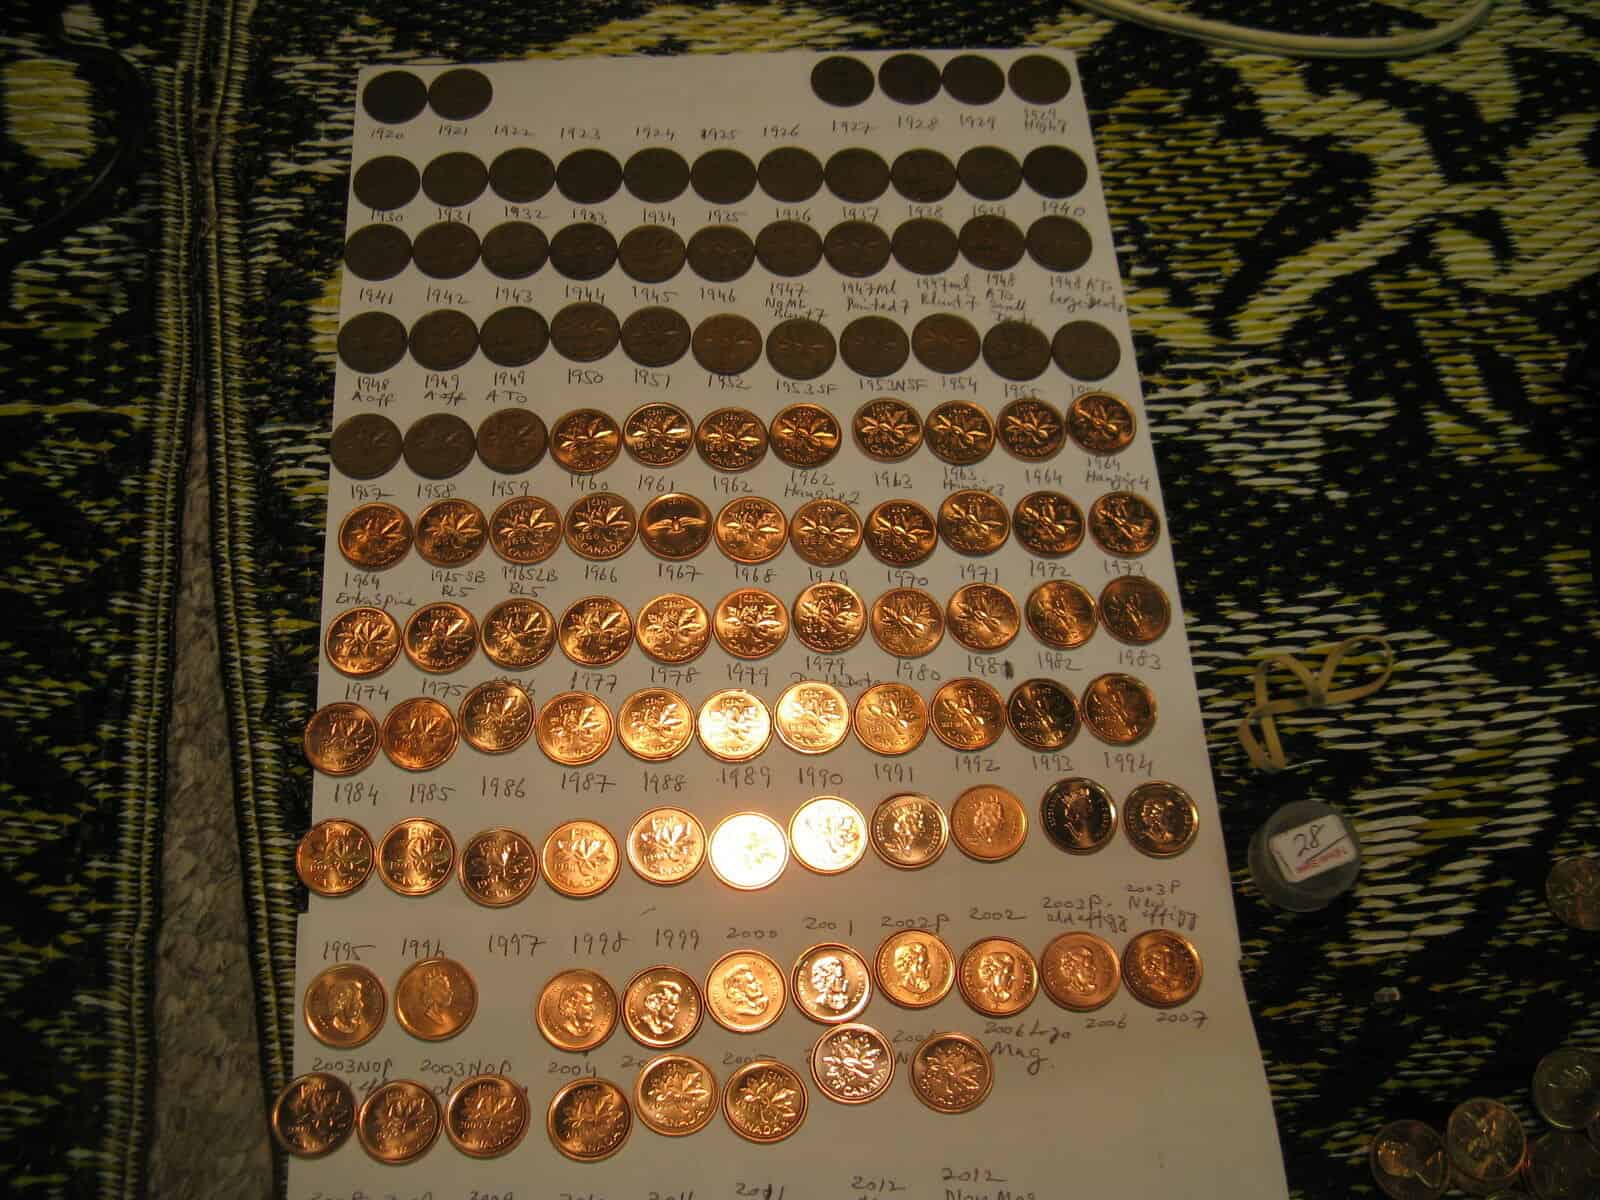 Canada 1920 To 2012 Pennies Collection With Many Rare Varieties Miss 1922 -1926